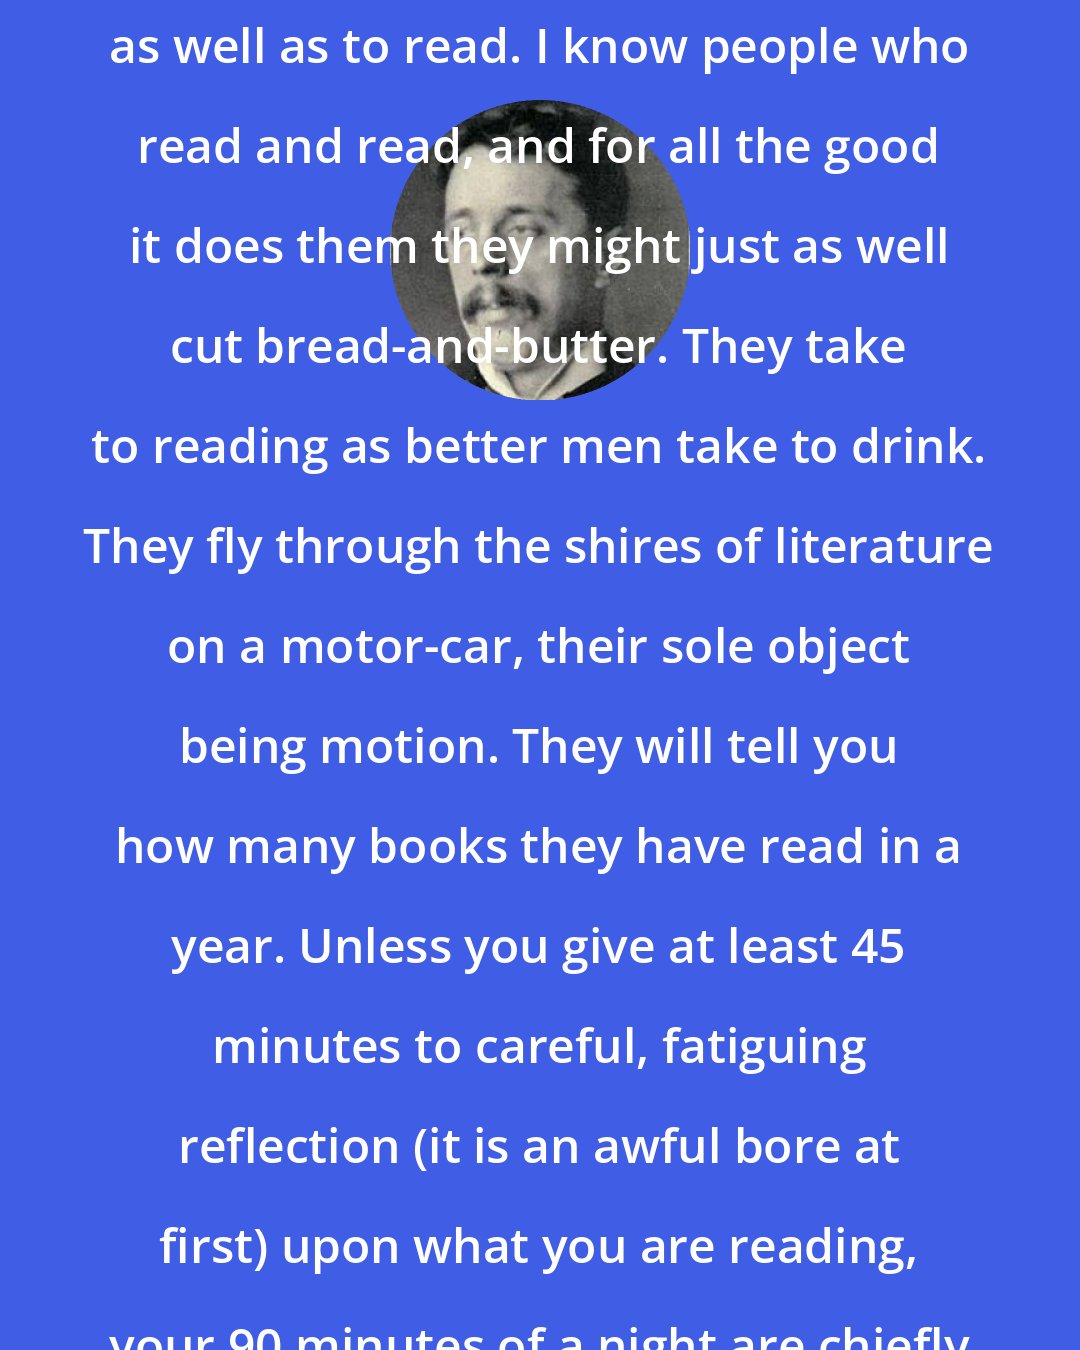 Arnold Bennett: The second suggestion is to think as well as to read. I know people who read and read, and for all the good it does them they might just as well cut bread-and-butter. They take to reading as better men take to drink. They fly through the shires of literature on a motor-car, their sole object being motion. They will tell you how many books they have read in a year. Unless you give at least 45 minutes to careful, fatiguing reflection (it is an awful bore at first) upon what you are reading, your 90 minutes of a night are chiefly wasted.